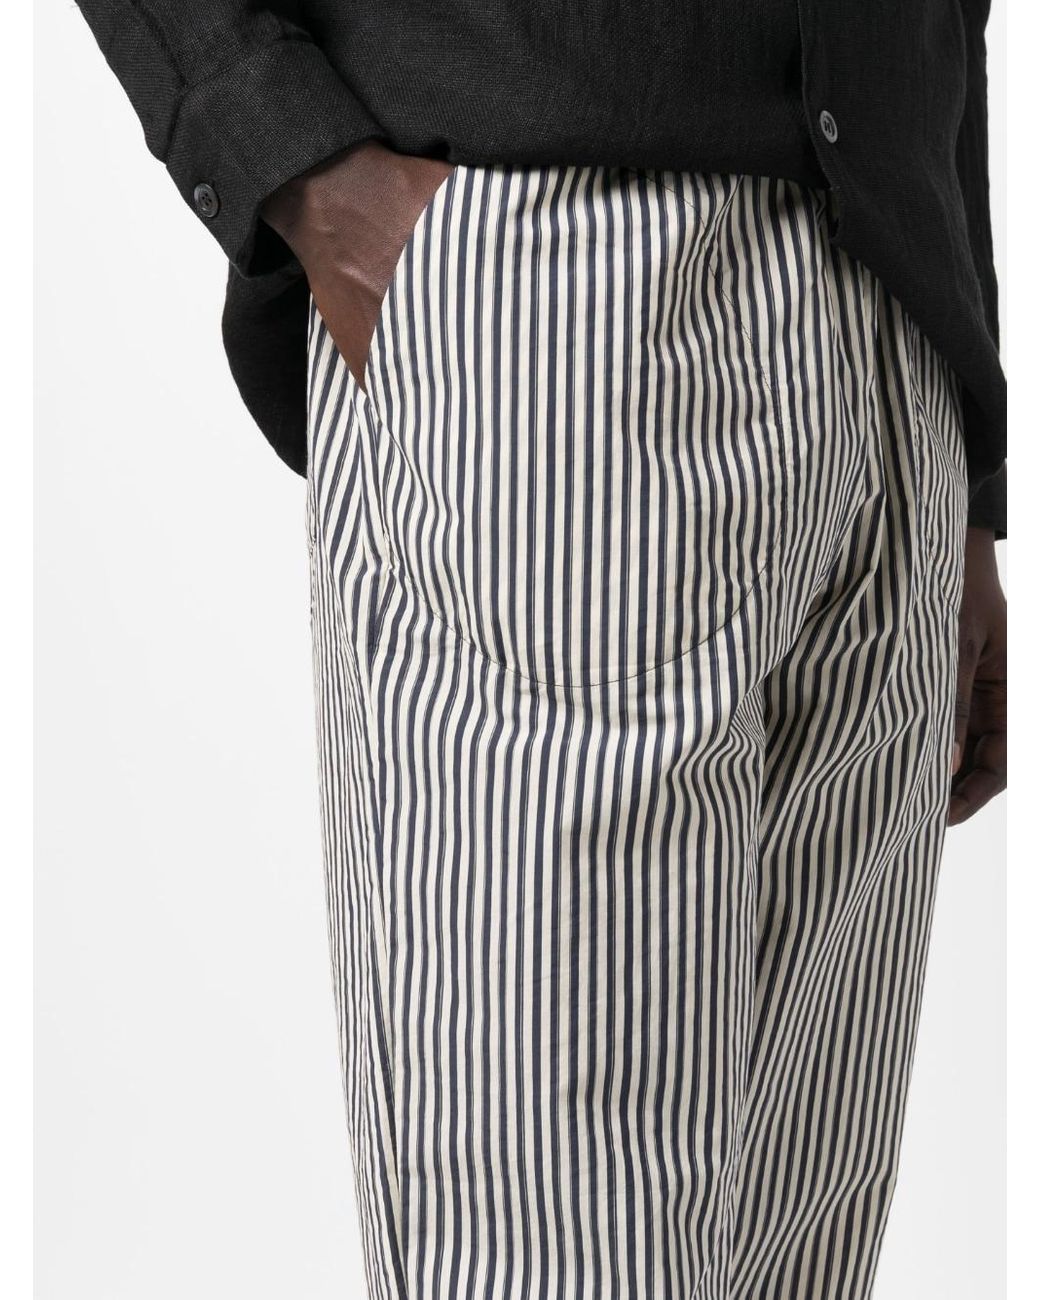 Arrow Autoflex Patterned Striped Trouser Grey 46 in Mehsana at best  price by Natty Multy Brand Option  Justdial